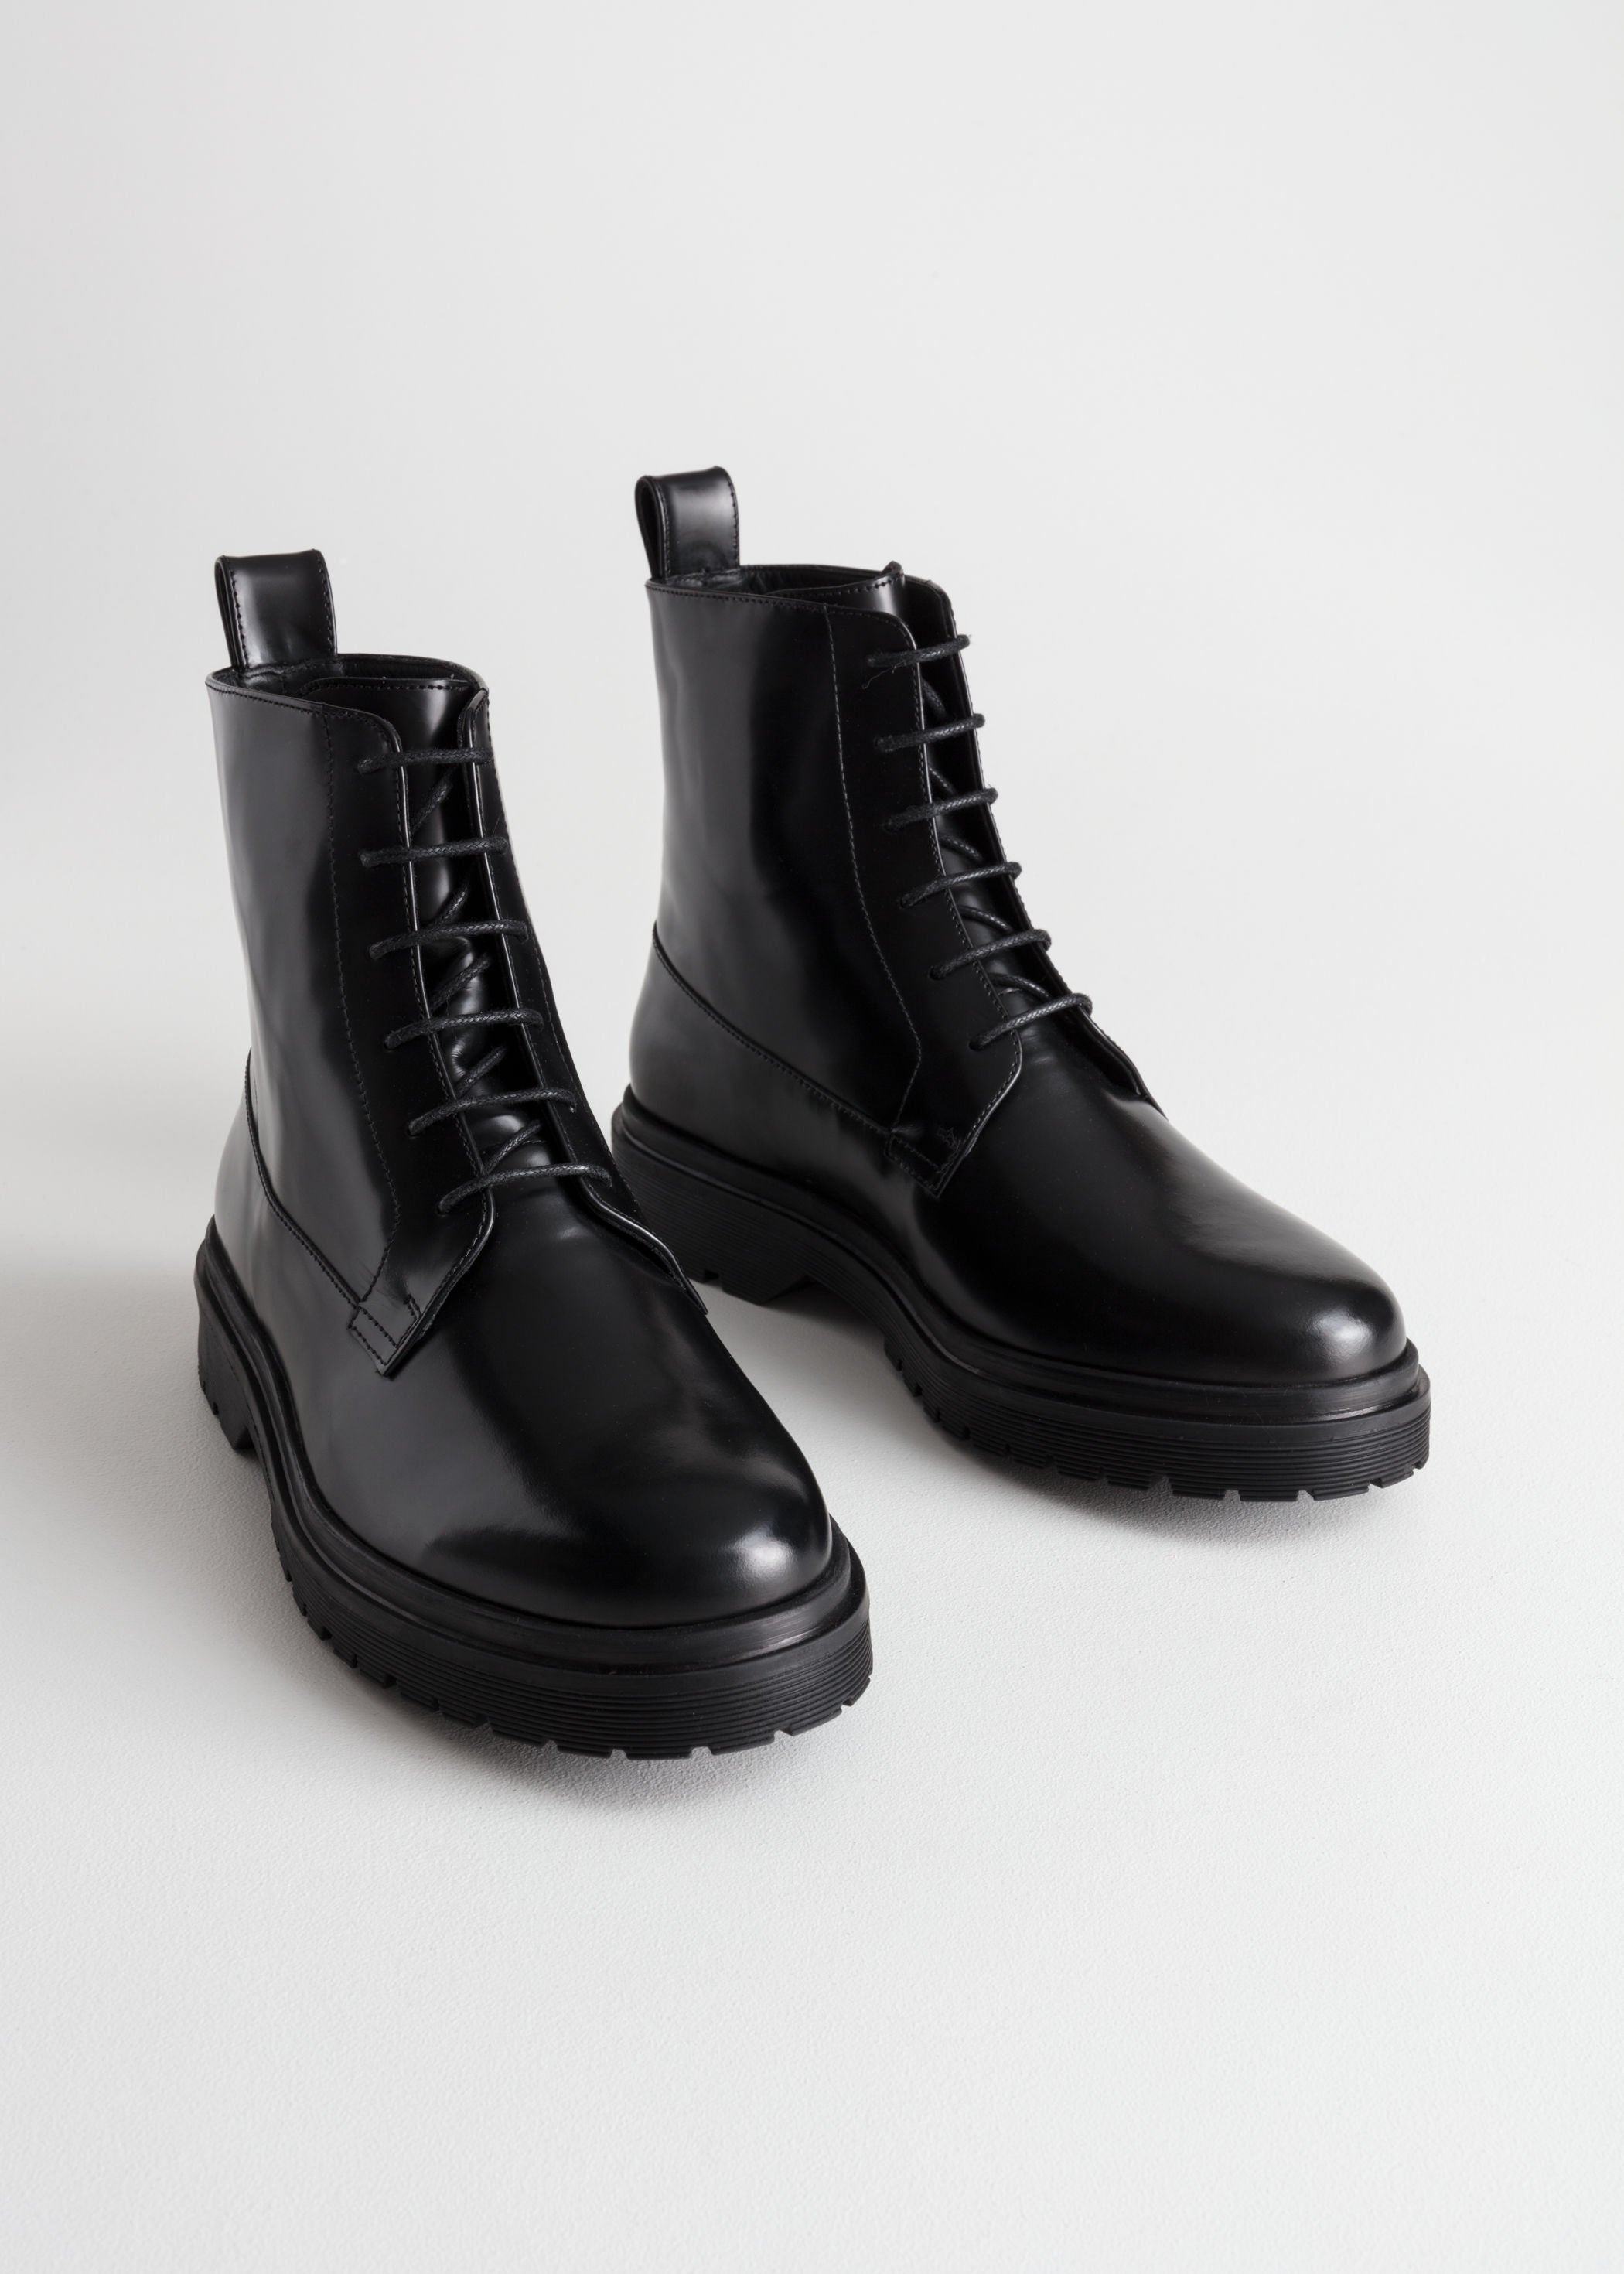 \u0026amp; Other Stories + Lace-Up Leather Boots